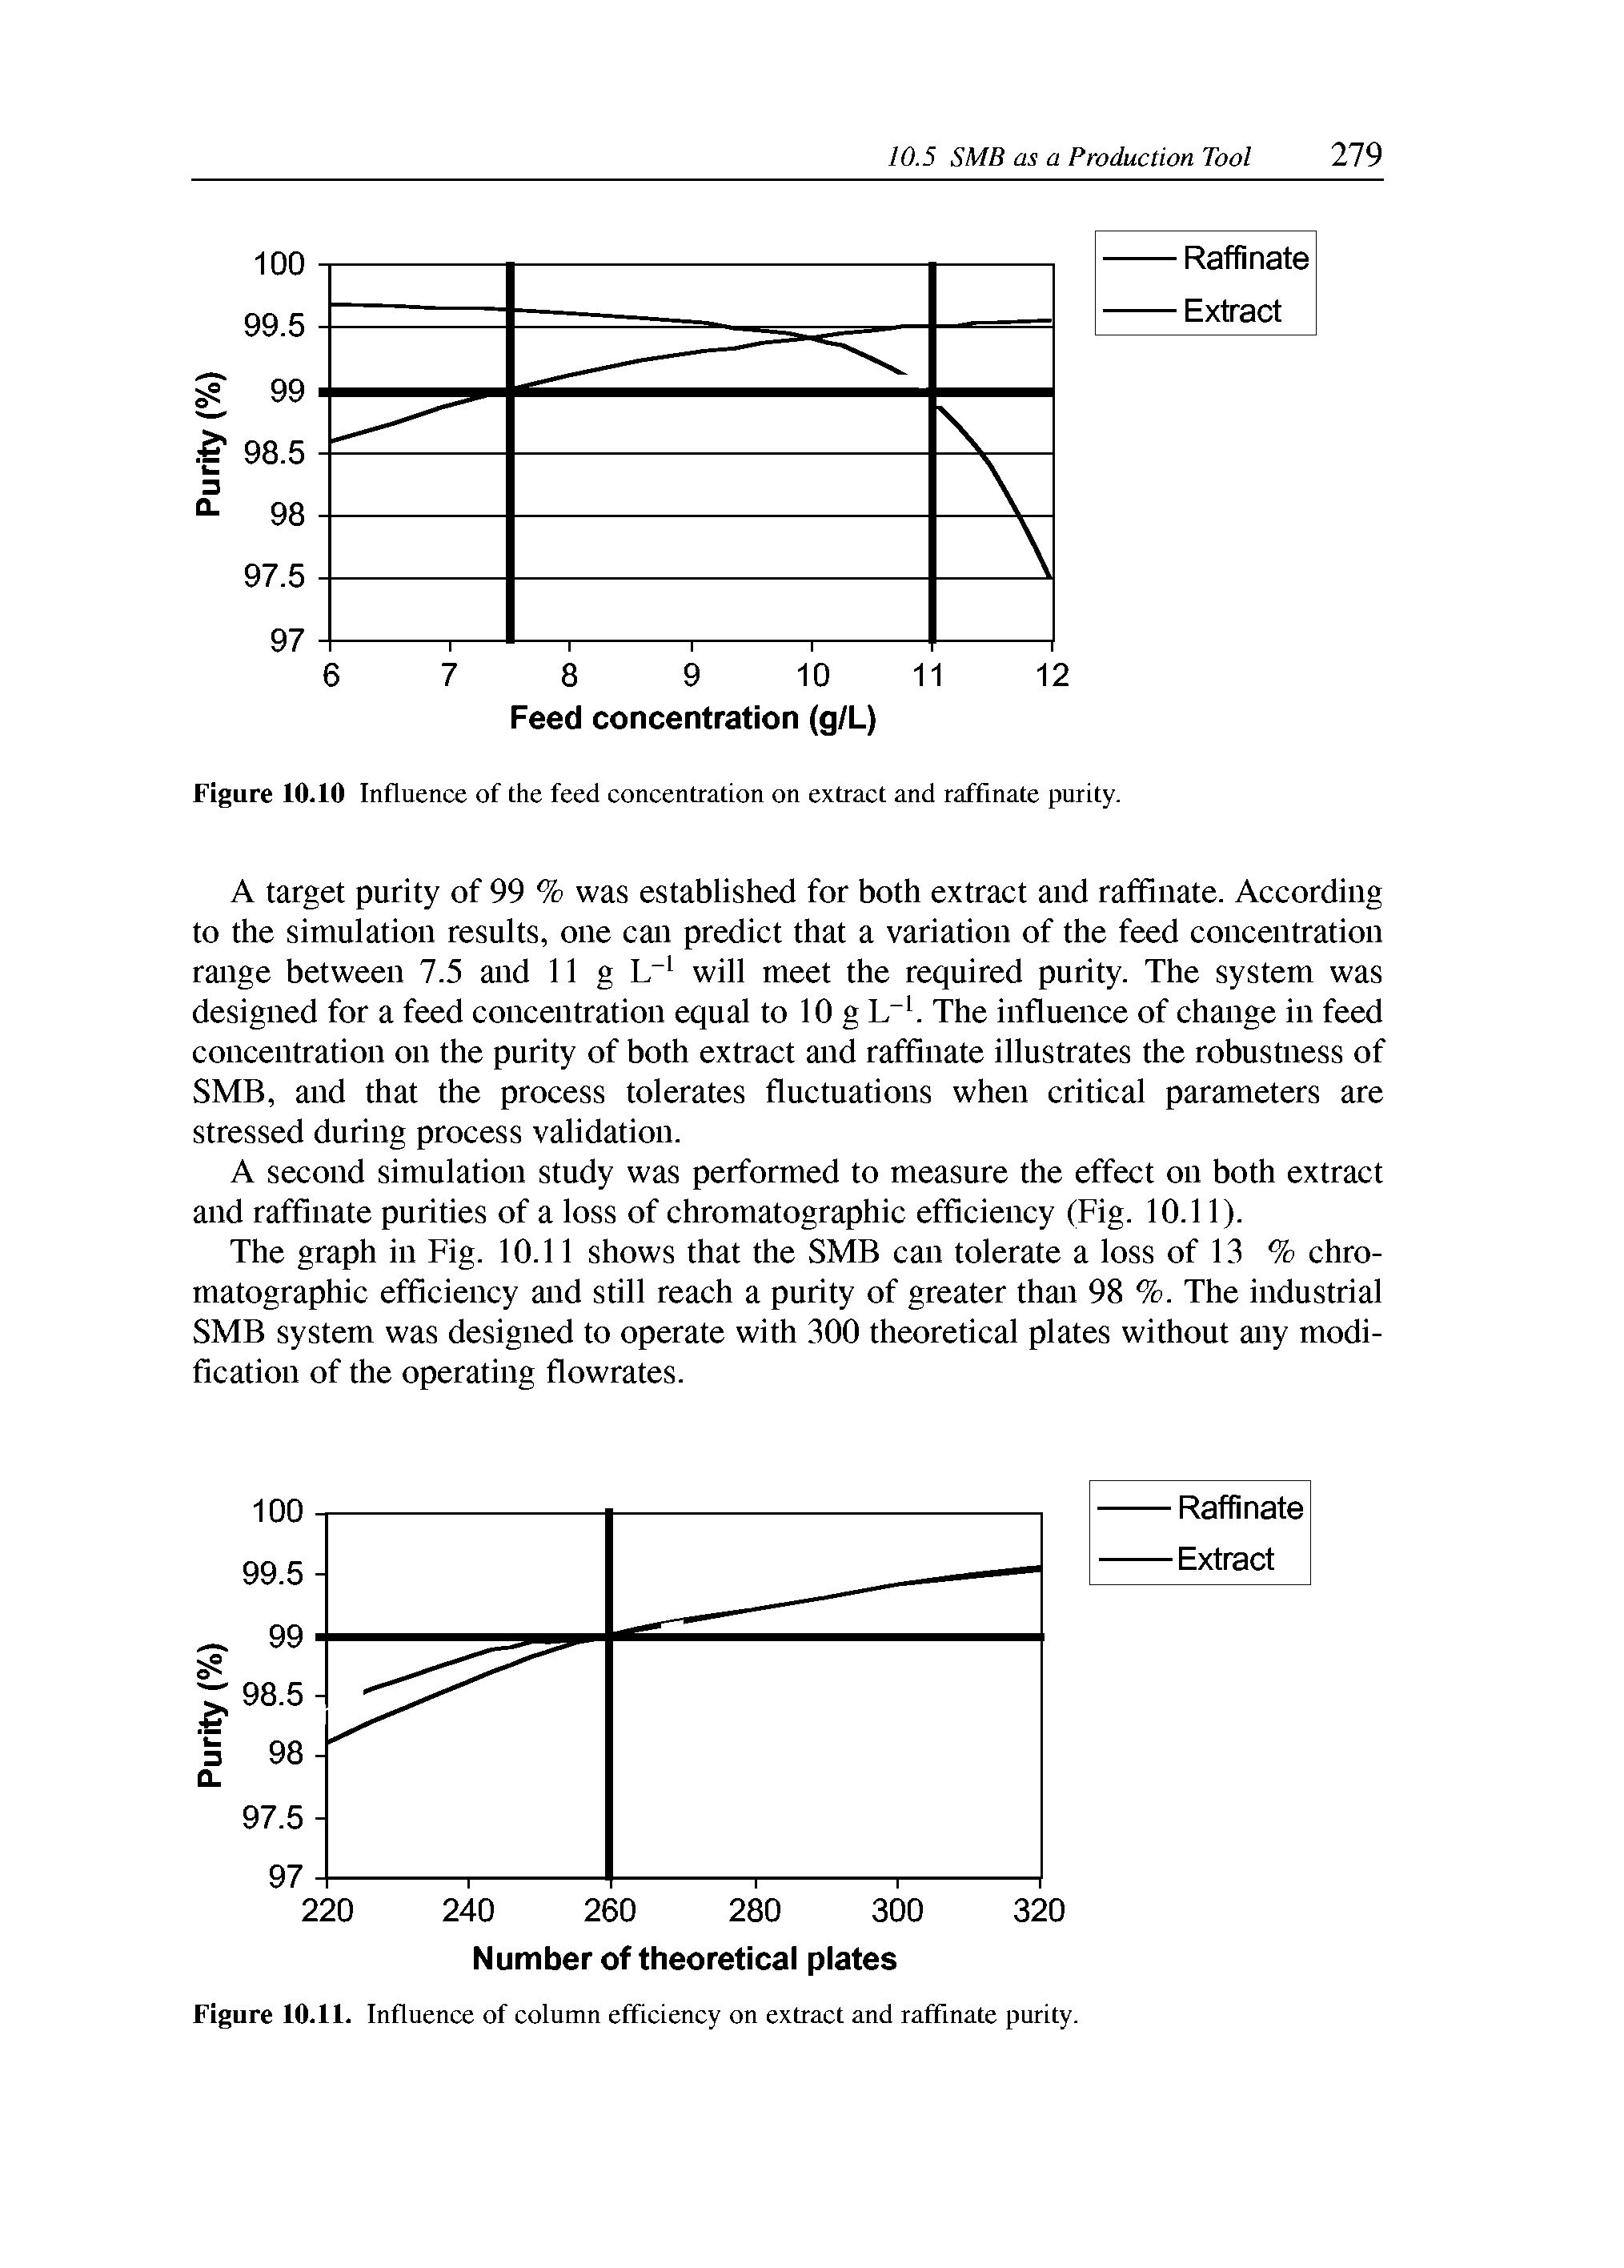 Figure 10.11. Influence of column efflciency on extract and raffinate purity.